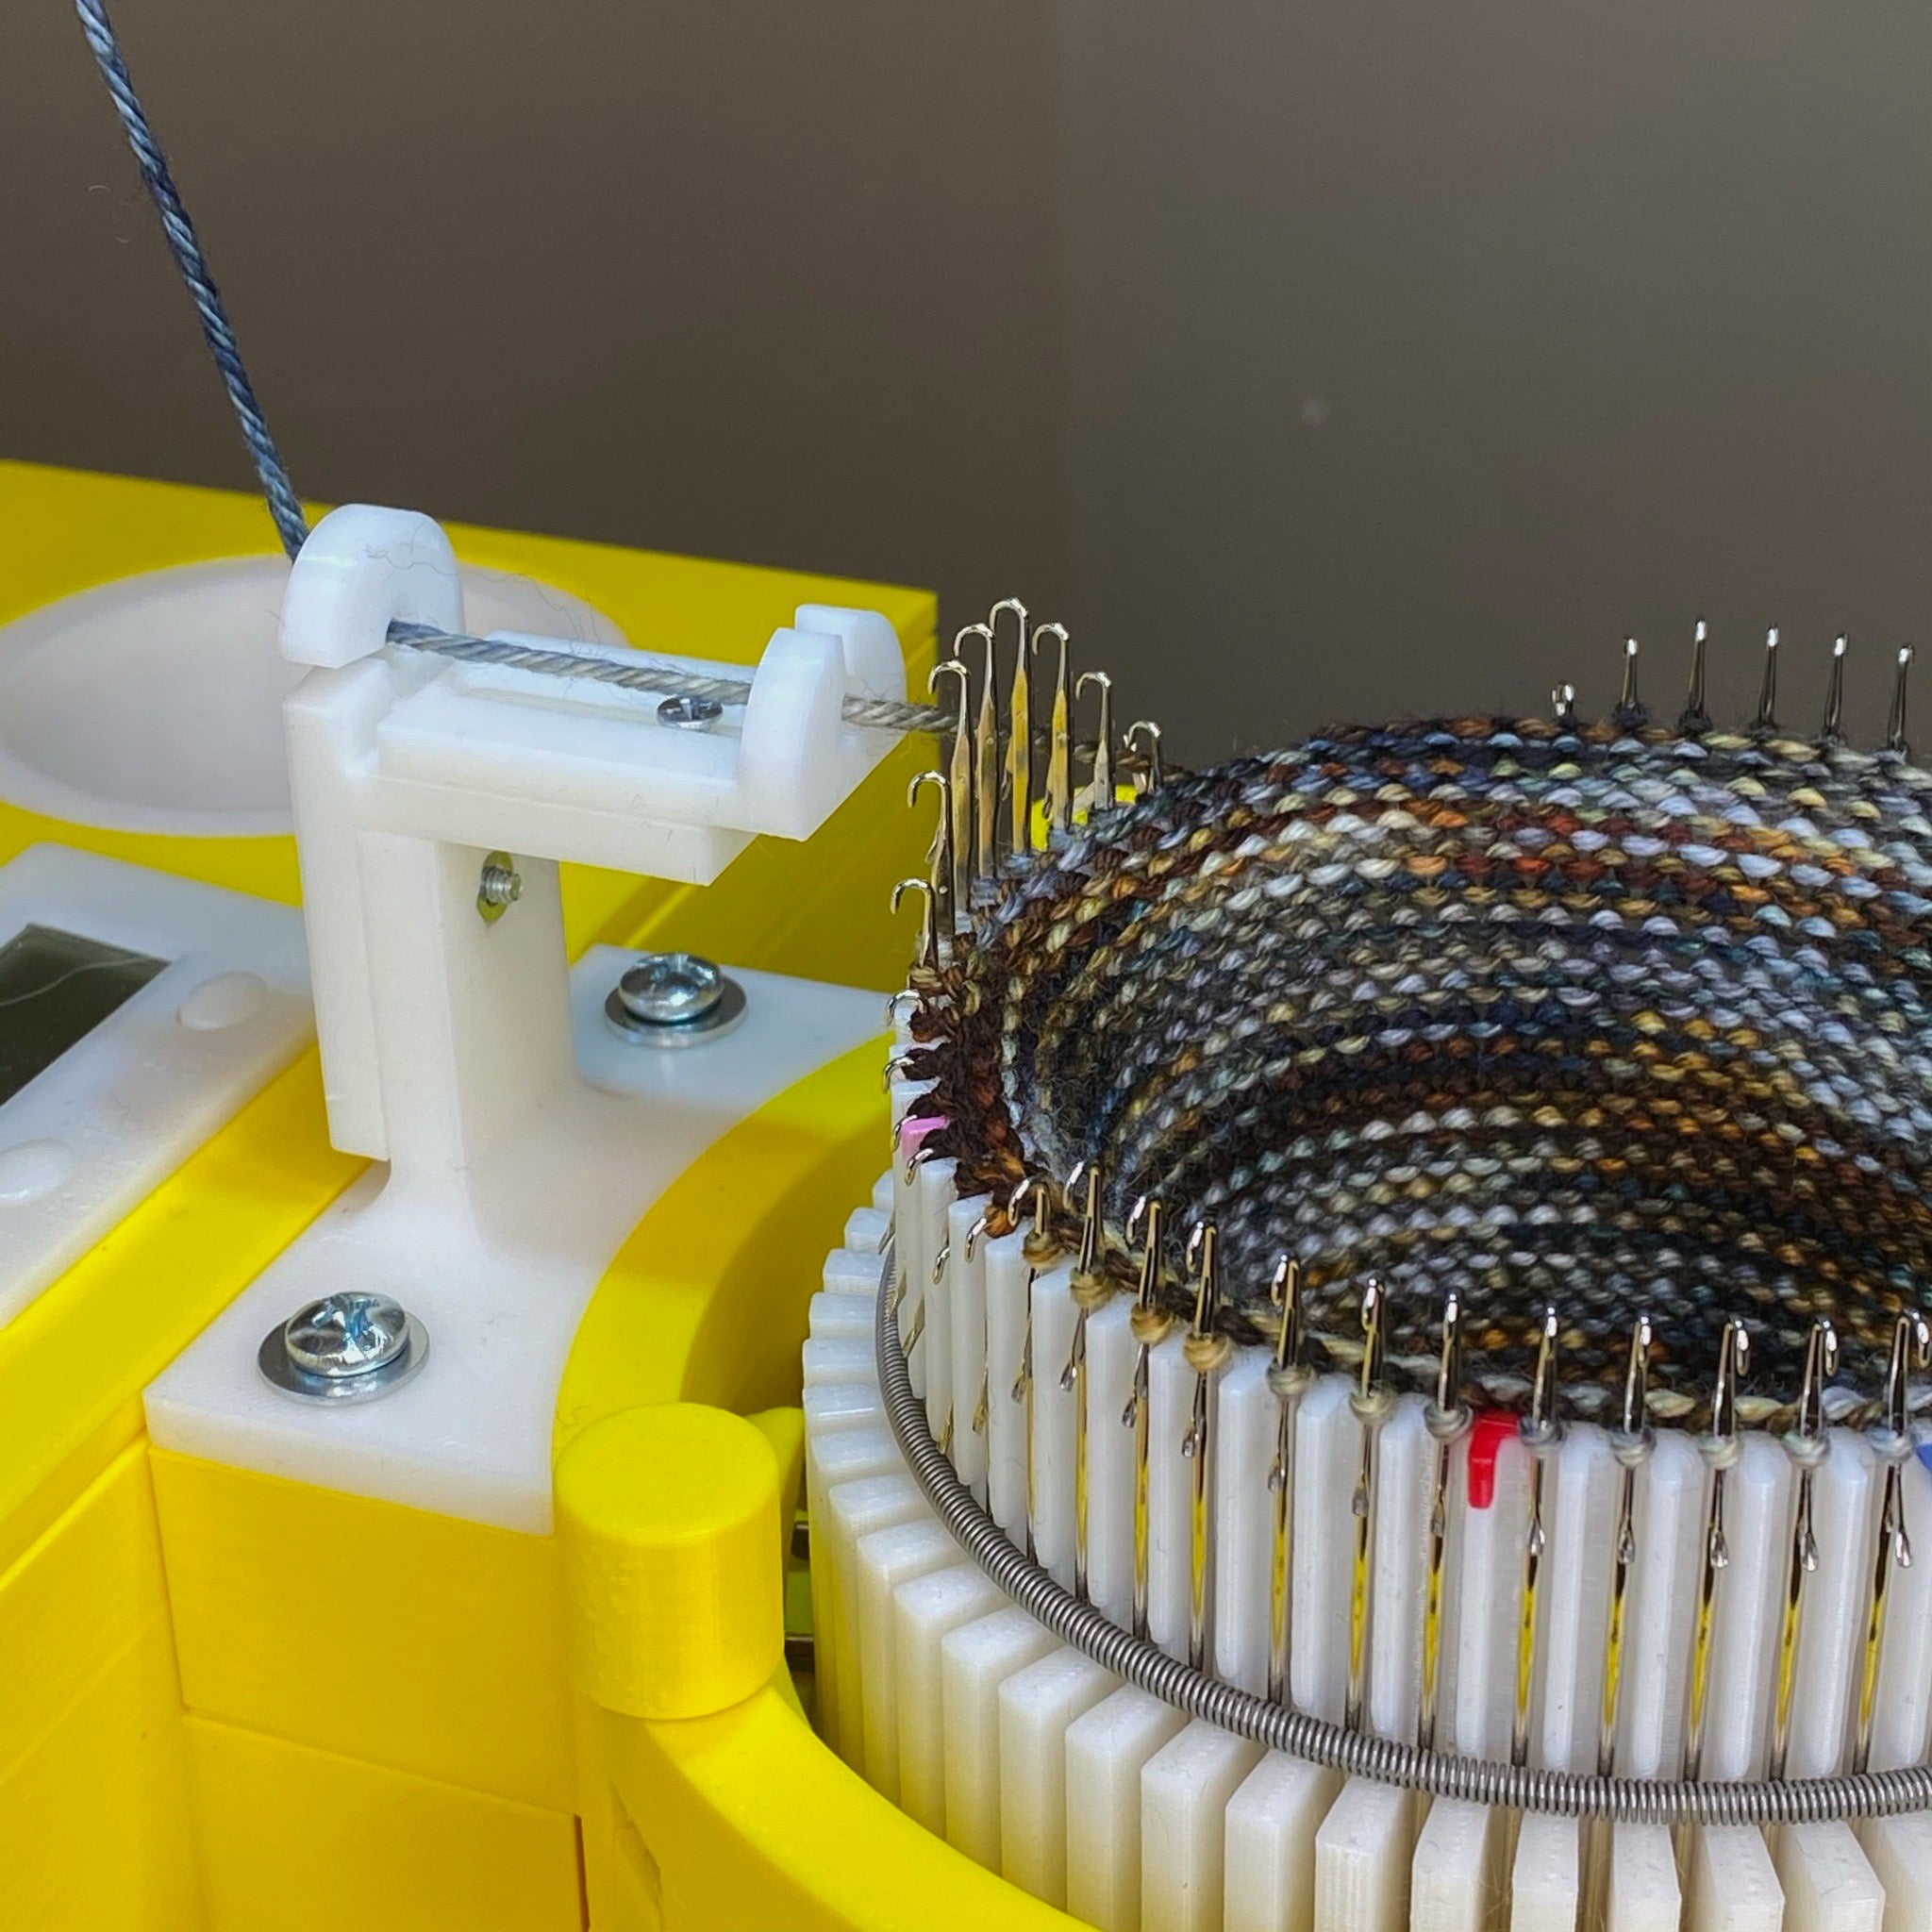 All About Circular Knitting Machine, by Catcheyes